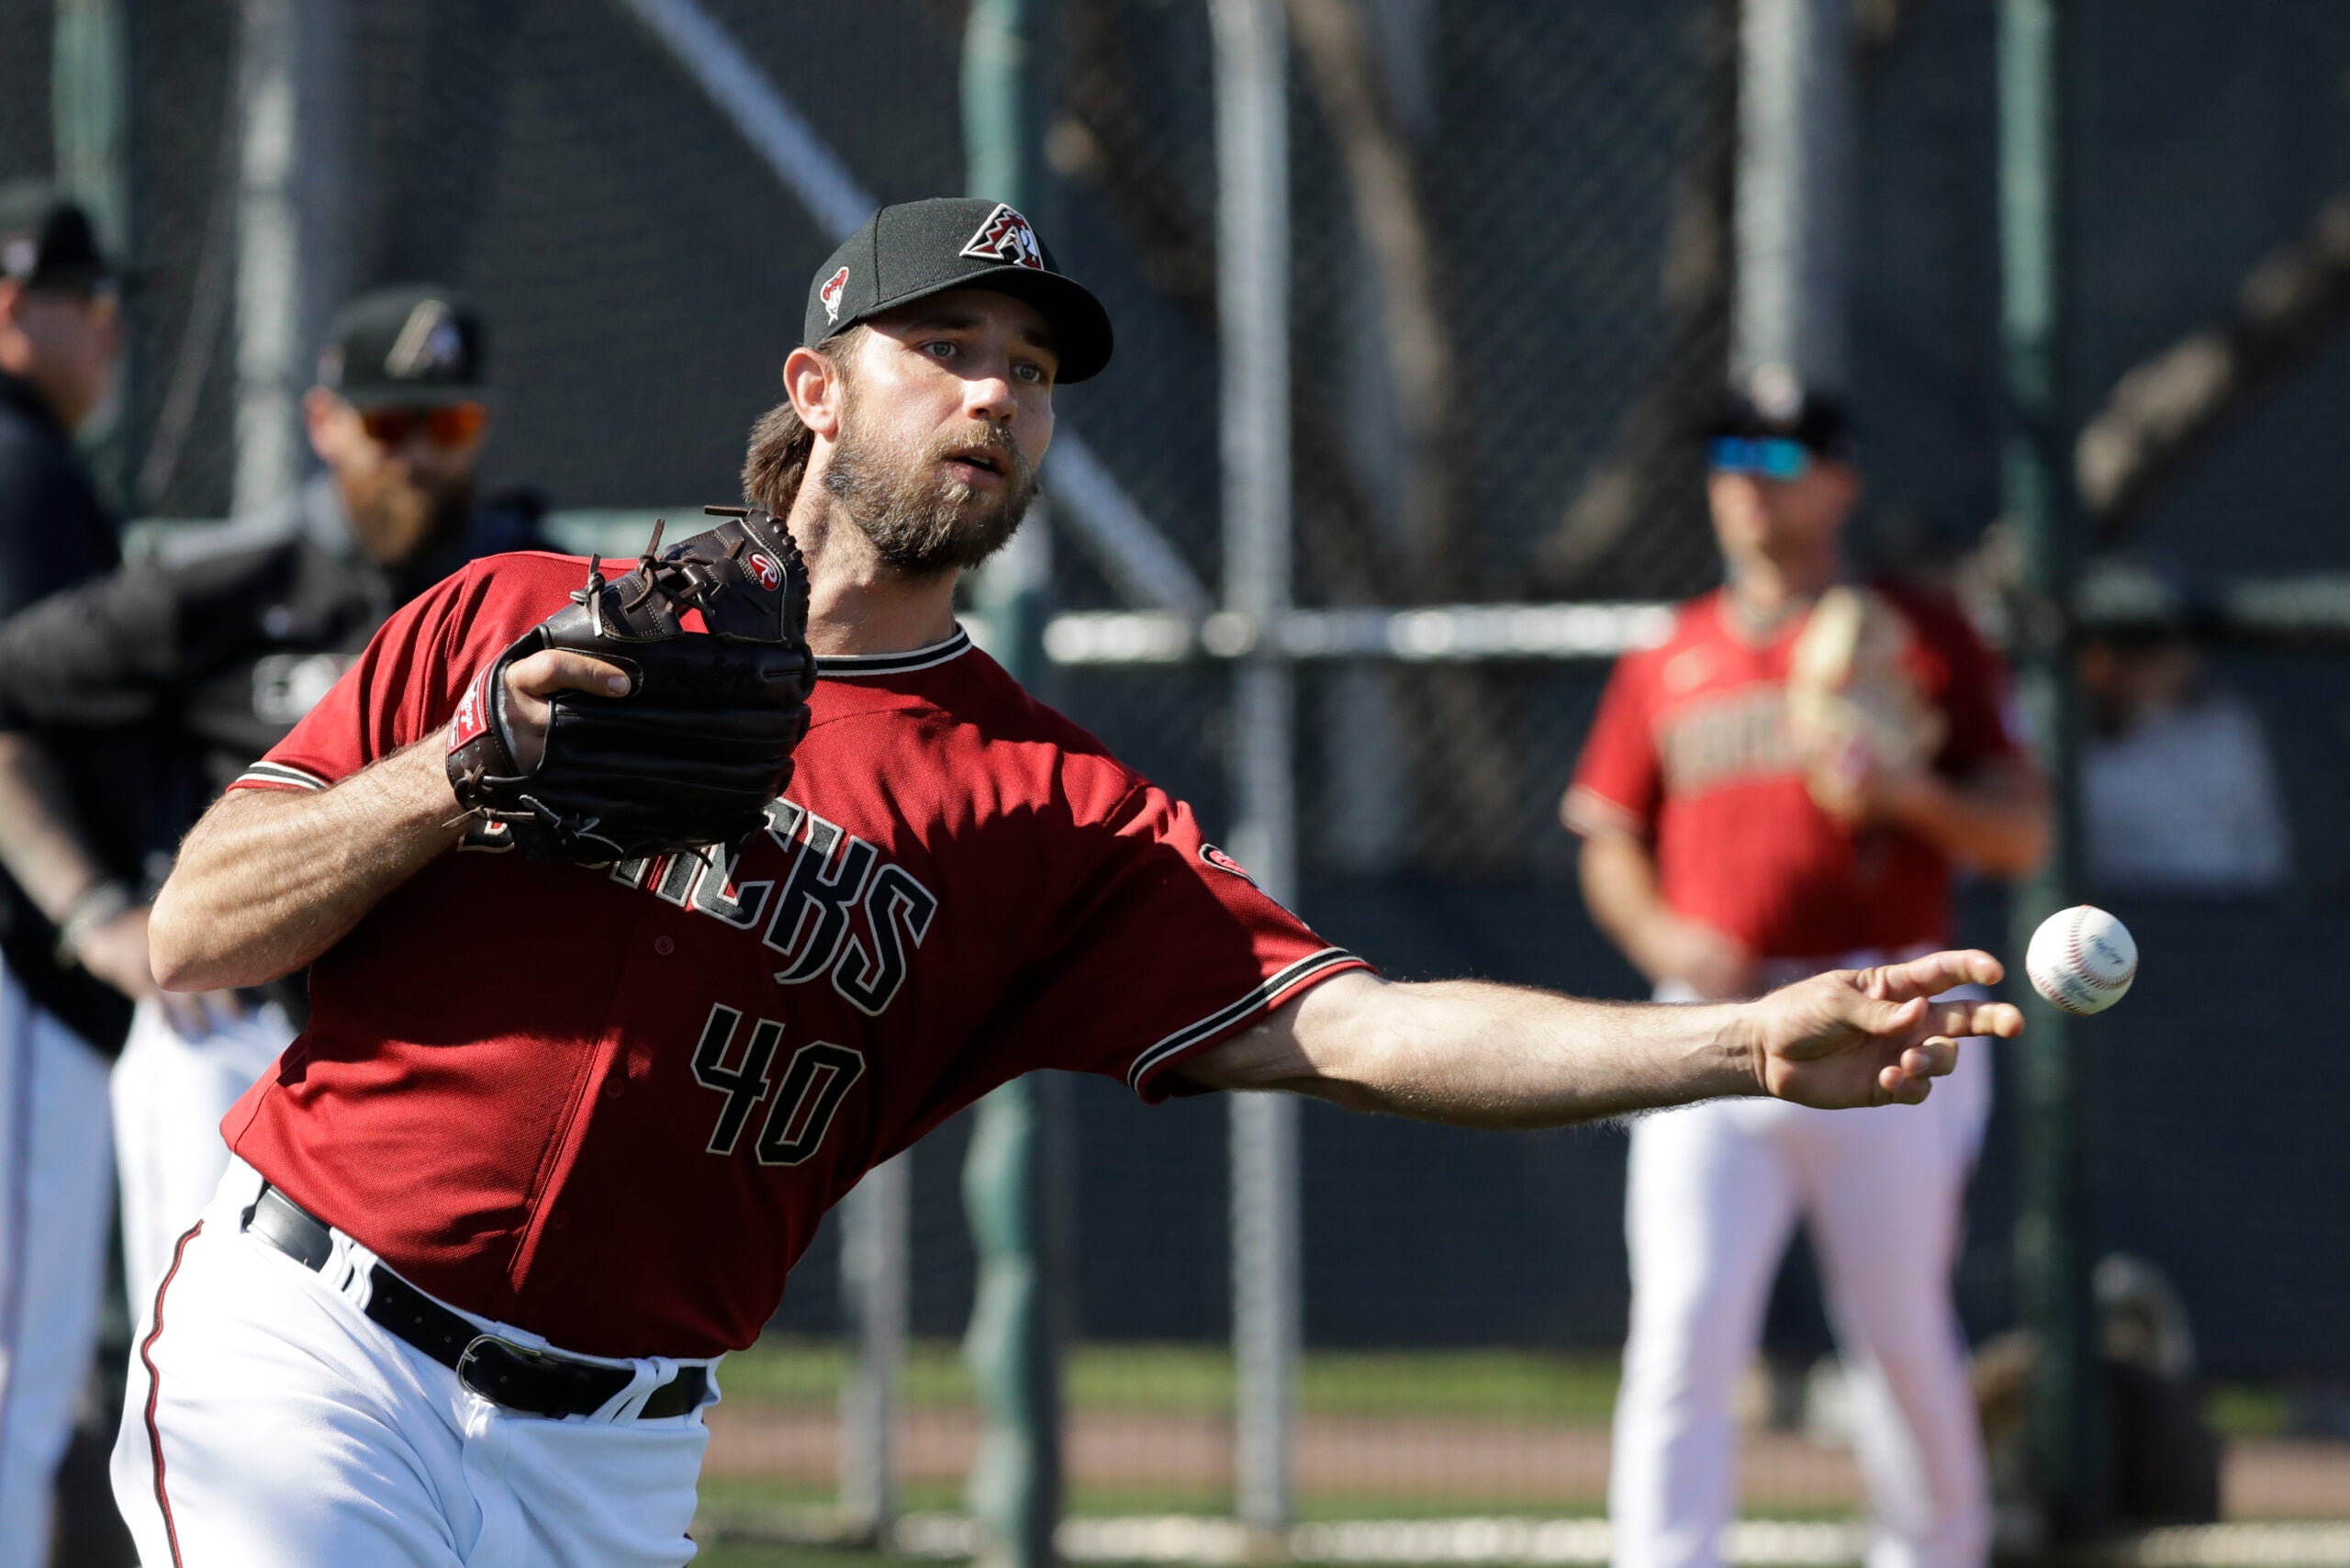 Not his first rodeo: D-Backs ace Madison Bumgarner admits to